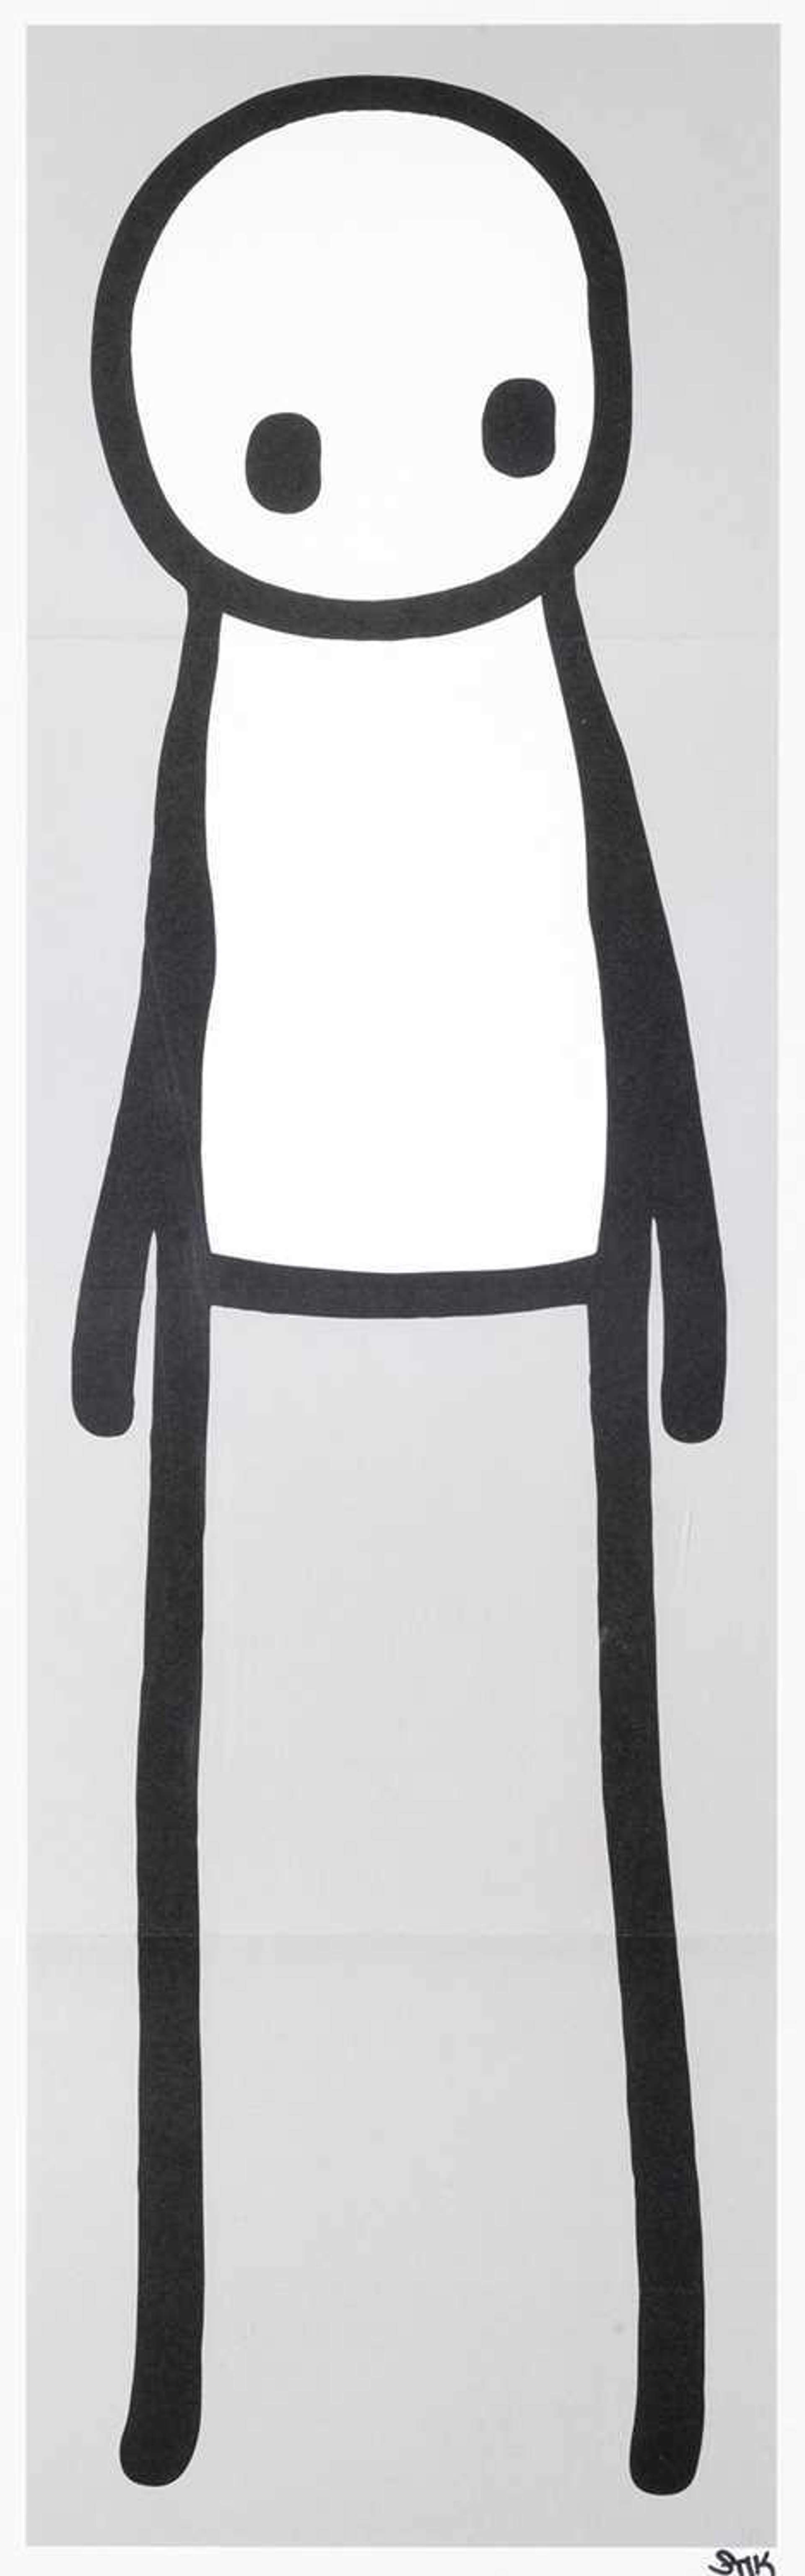 Standing Figure (silver) by Stik